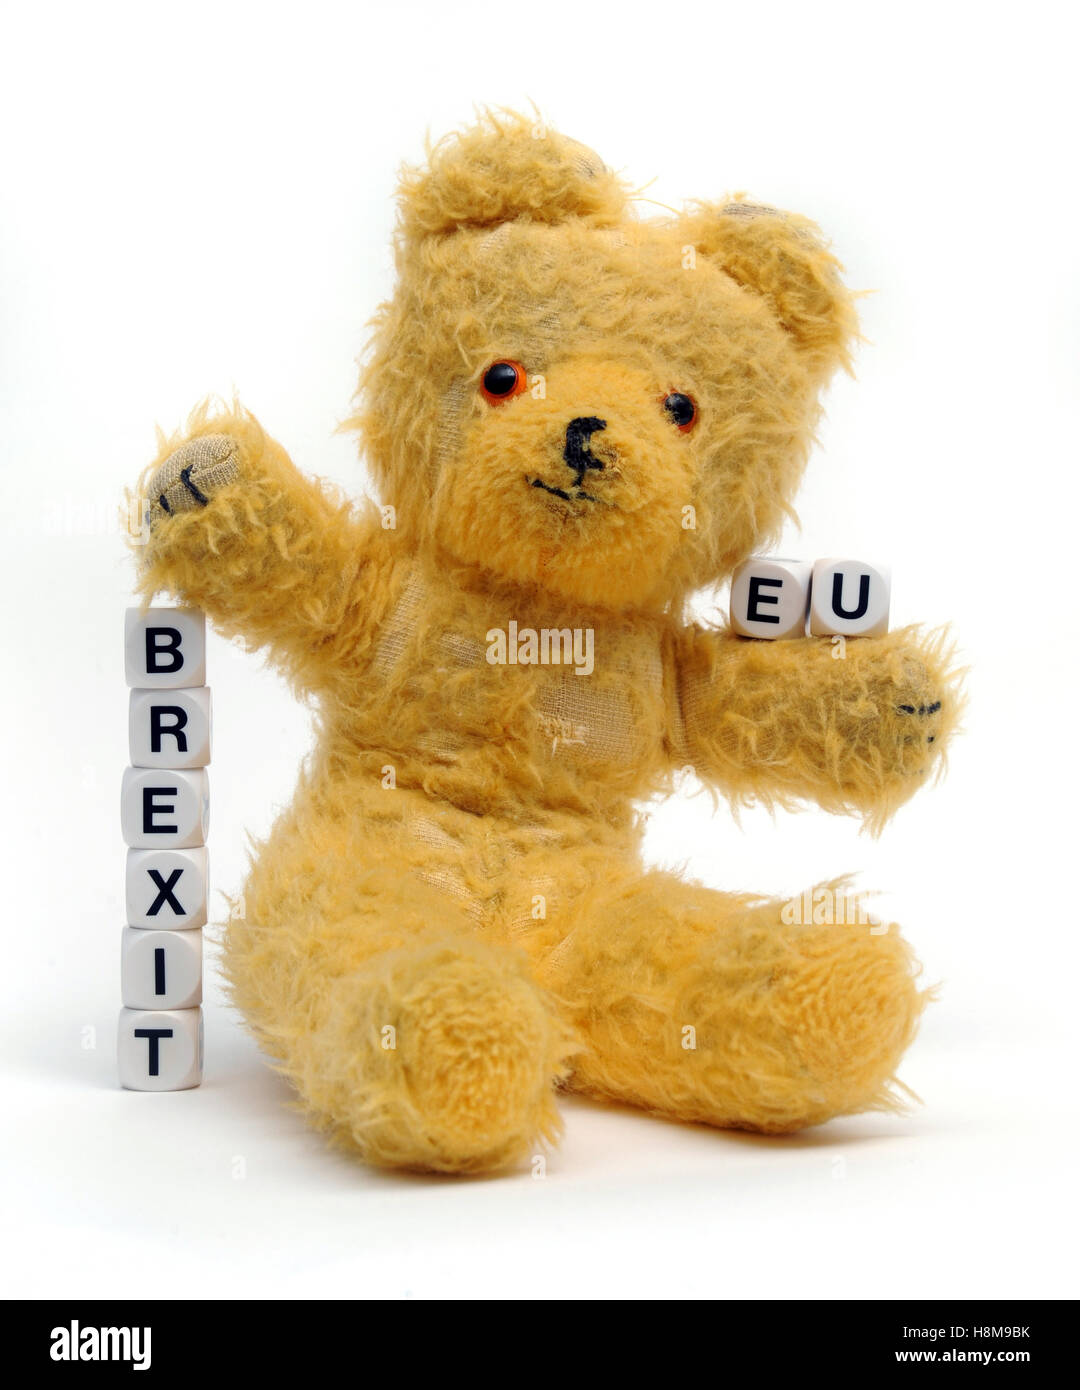 OLD TEDDY BEAR WITH WORD DICE SPELLING 'BREXIT' AND 'EU' RE BREXIT THE EU LEAVING REFERENDUM VOTE THE EUROPEAN UNION LEAVE GB UK Stock Photo